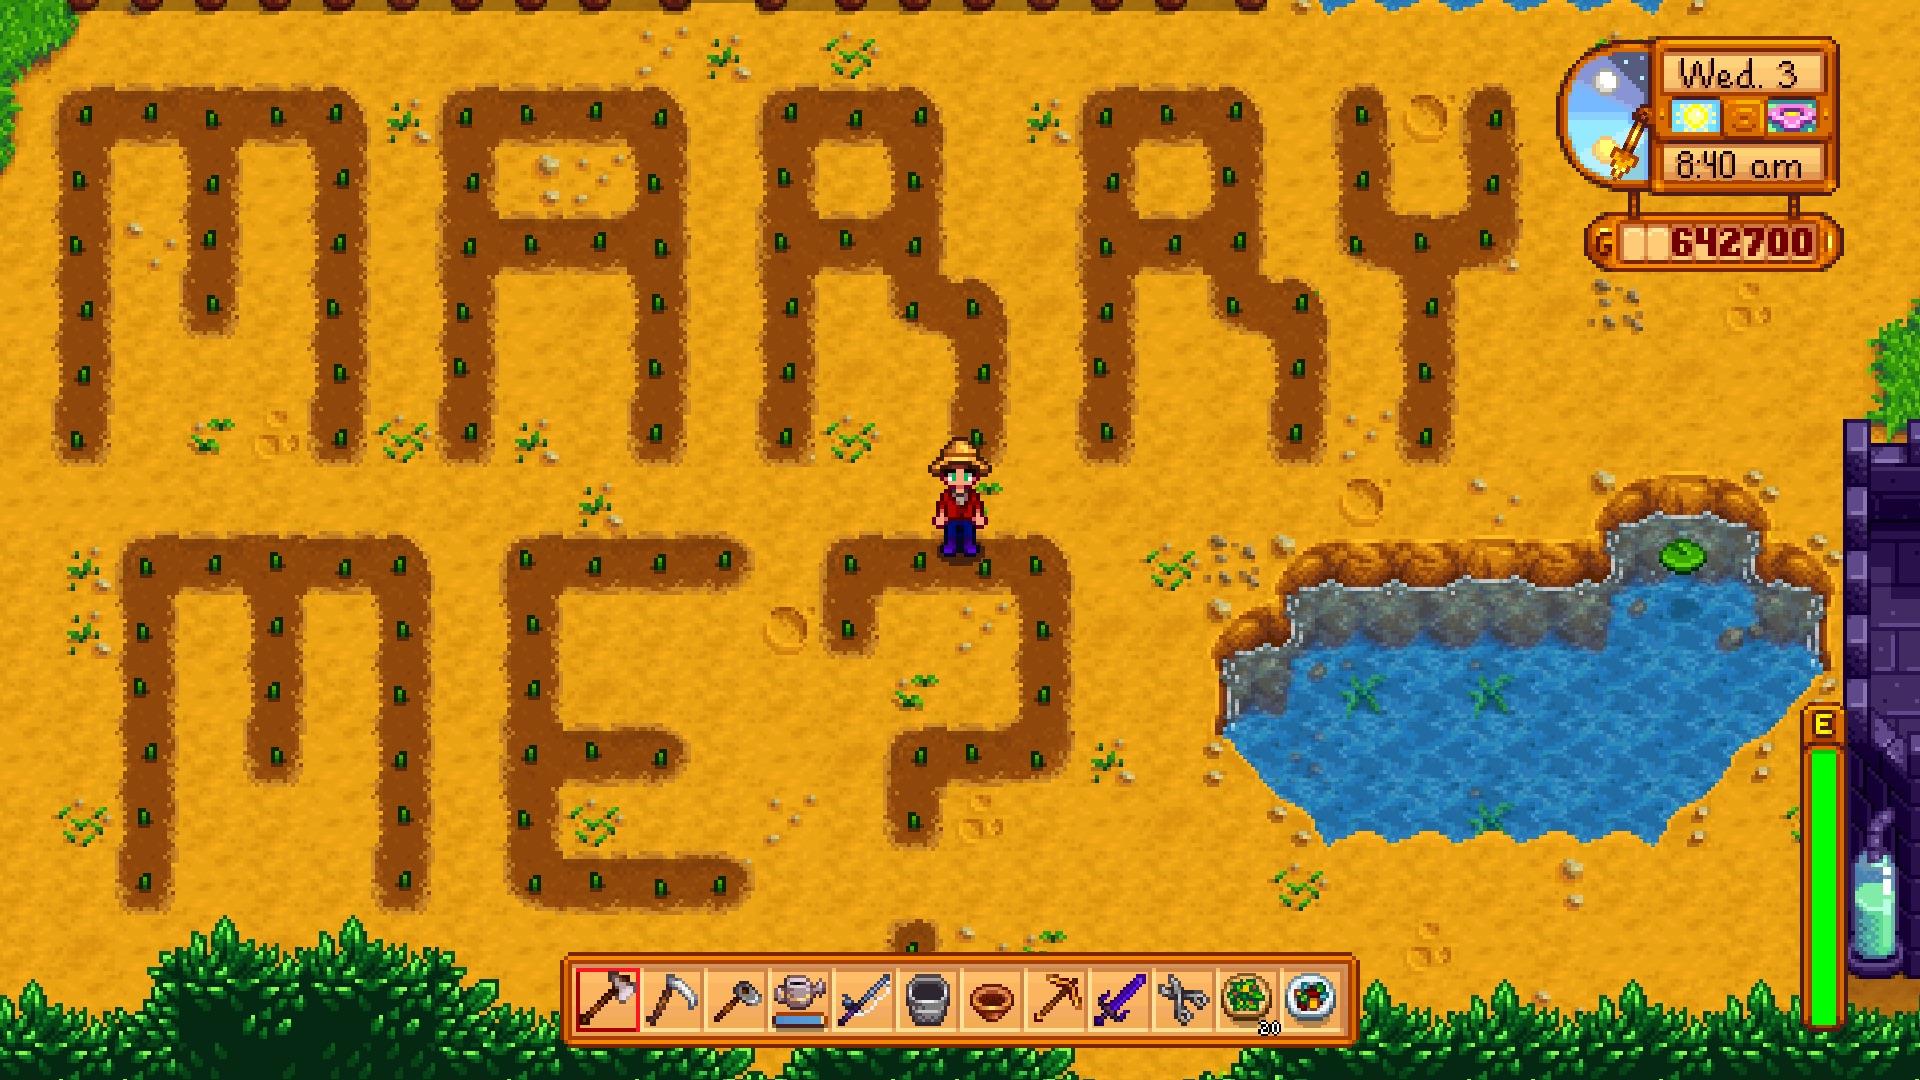 Meet the couple who got engaged in Stardew Valley